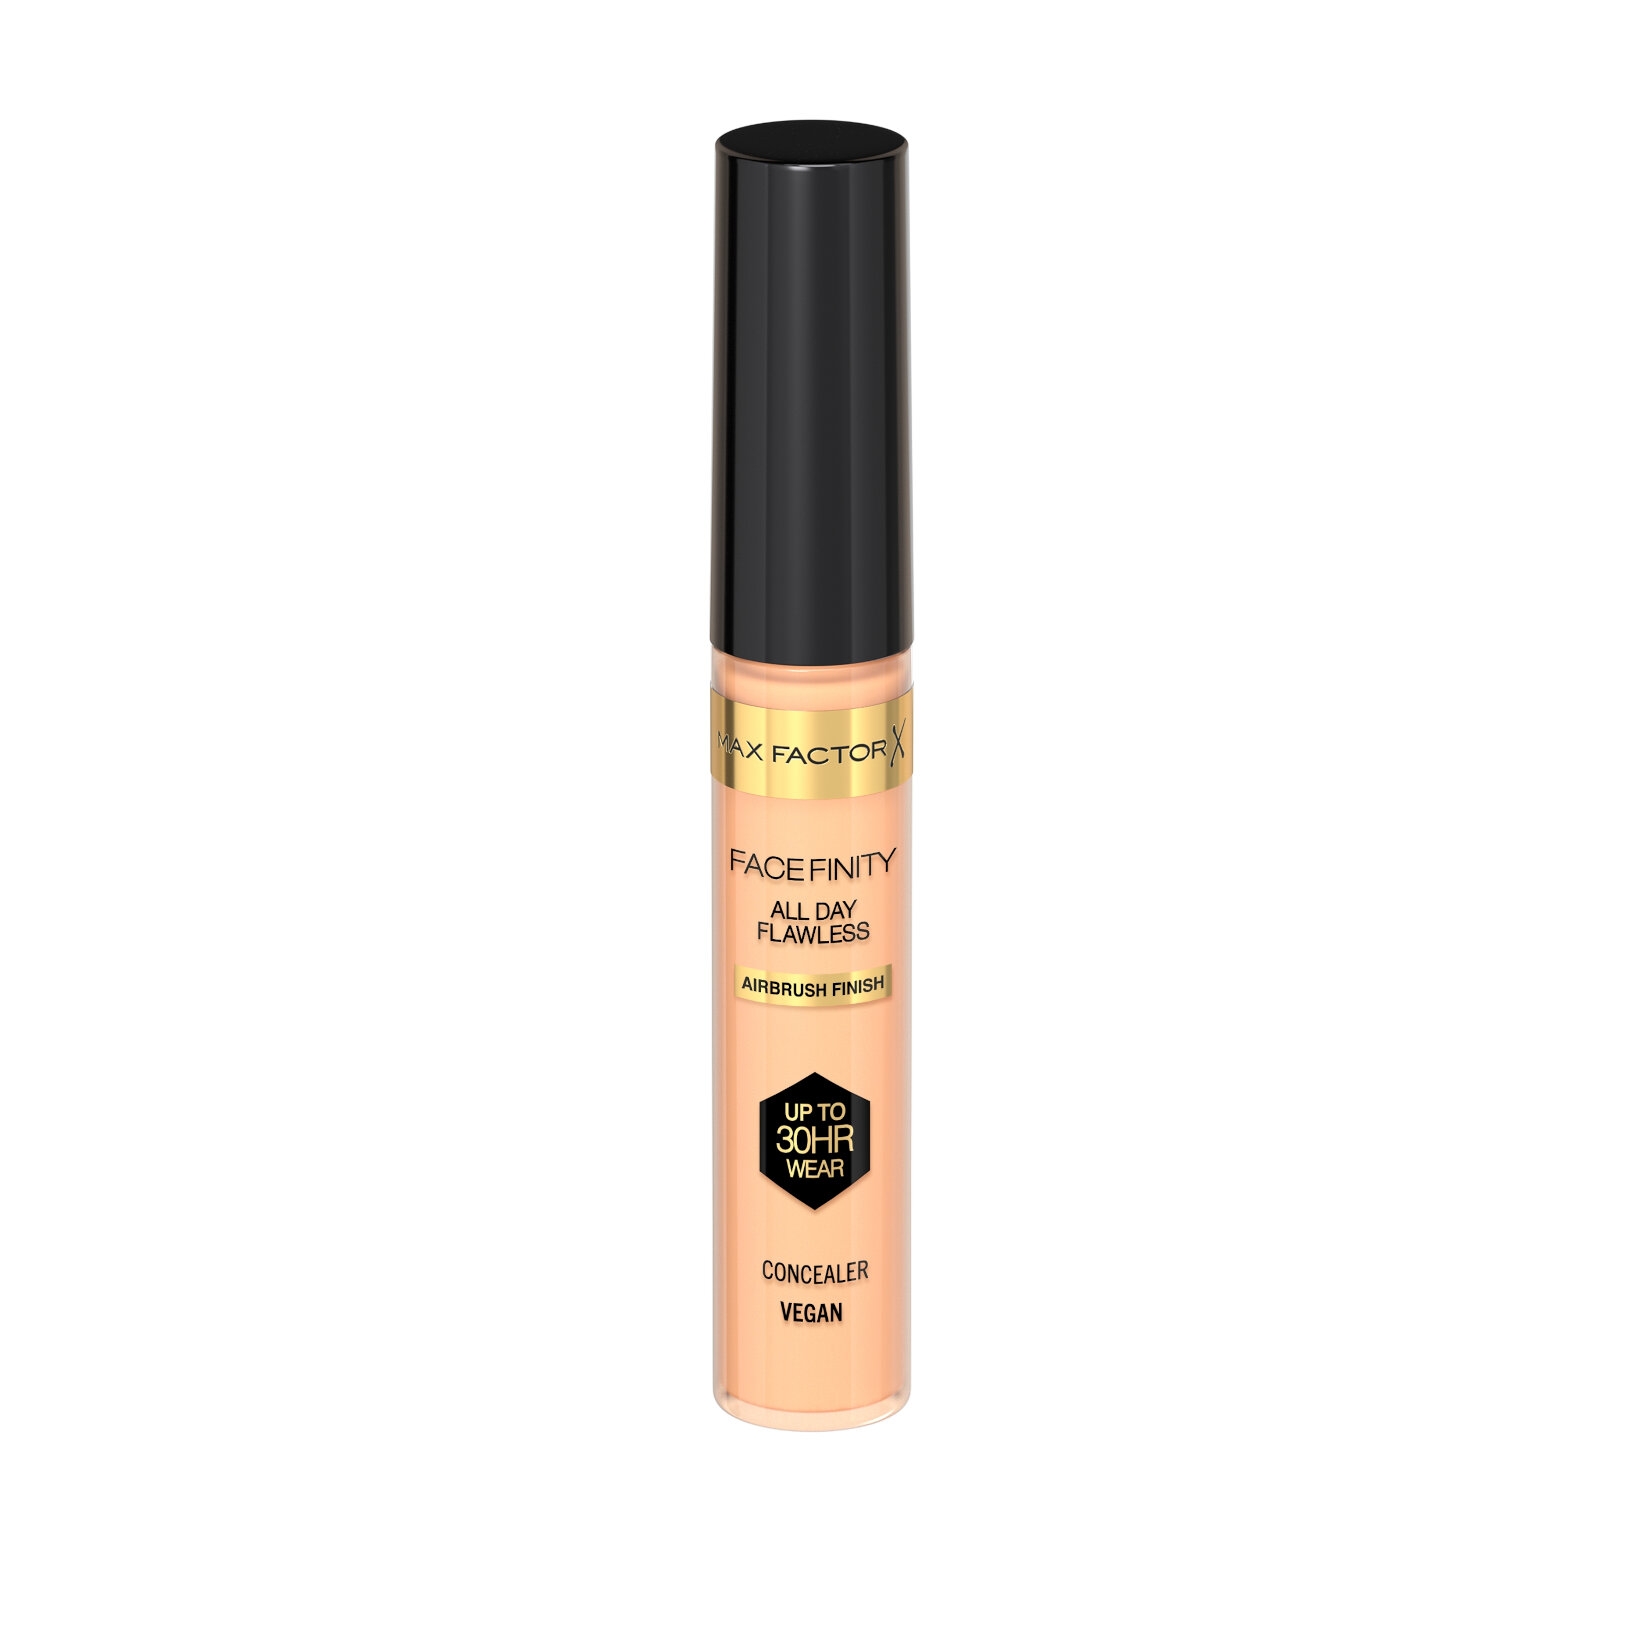 Facefinity All Day Flawless Vegan Lightweight Liquid Concealer | Max Factor